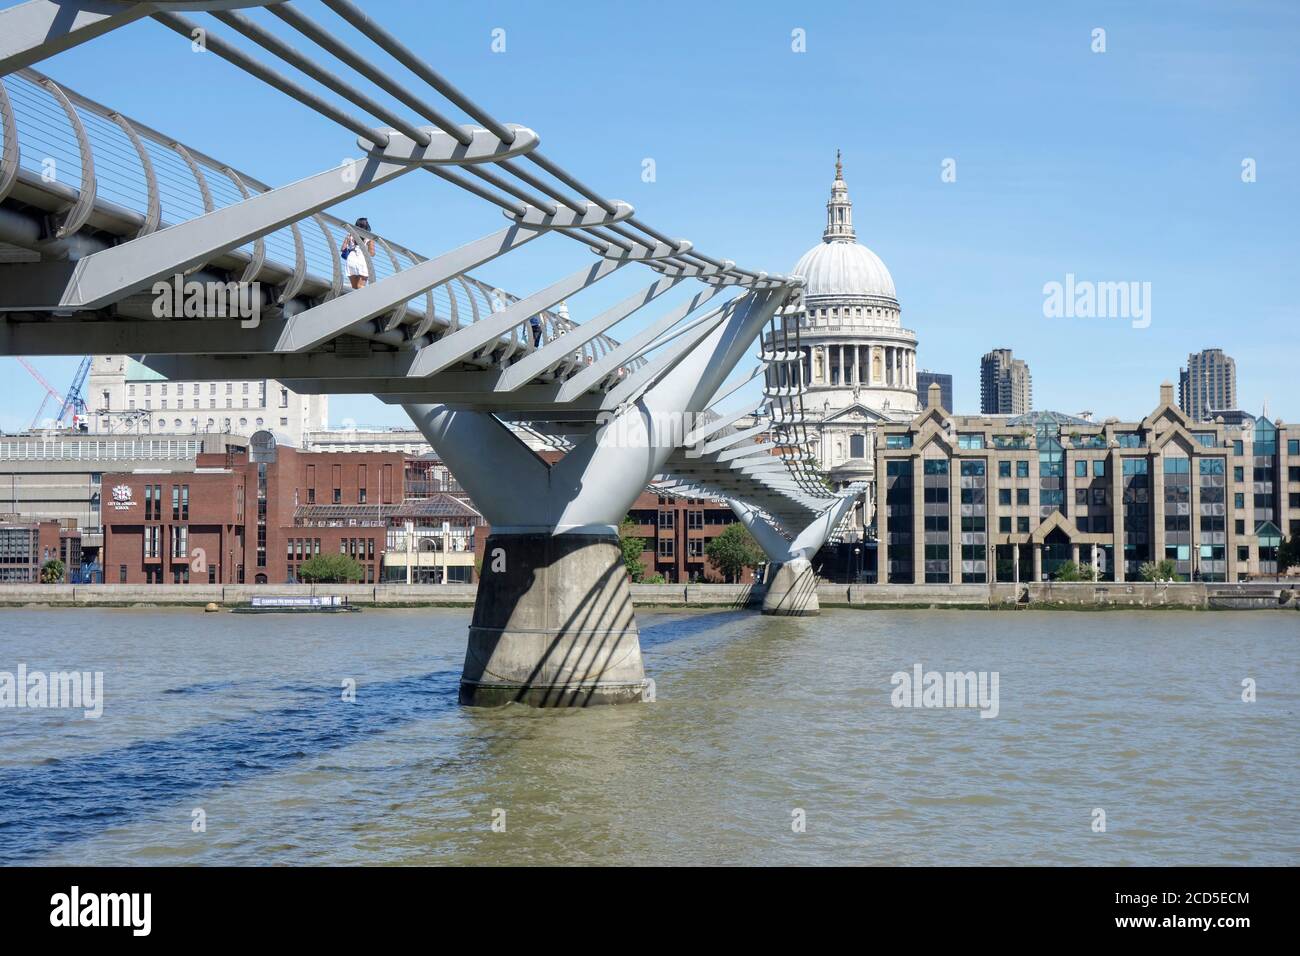 The view from South bank across the River Thames to St Paul's Cathedral. Stock Photo